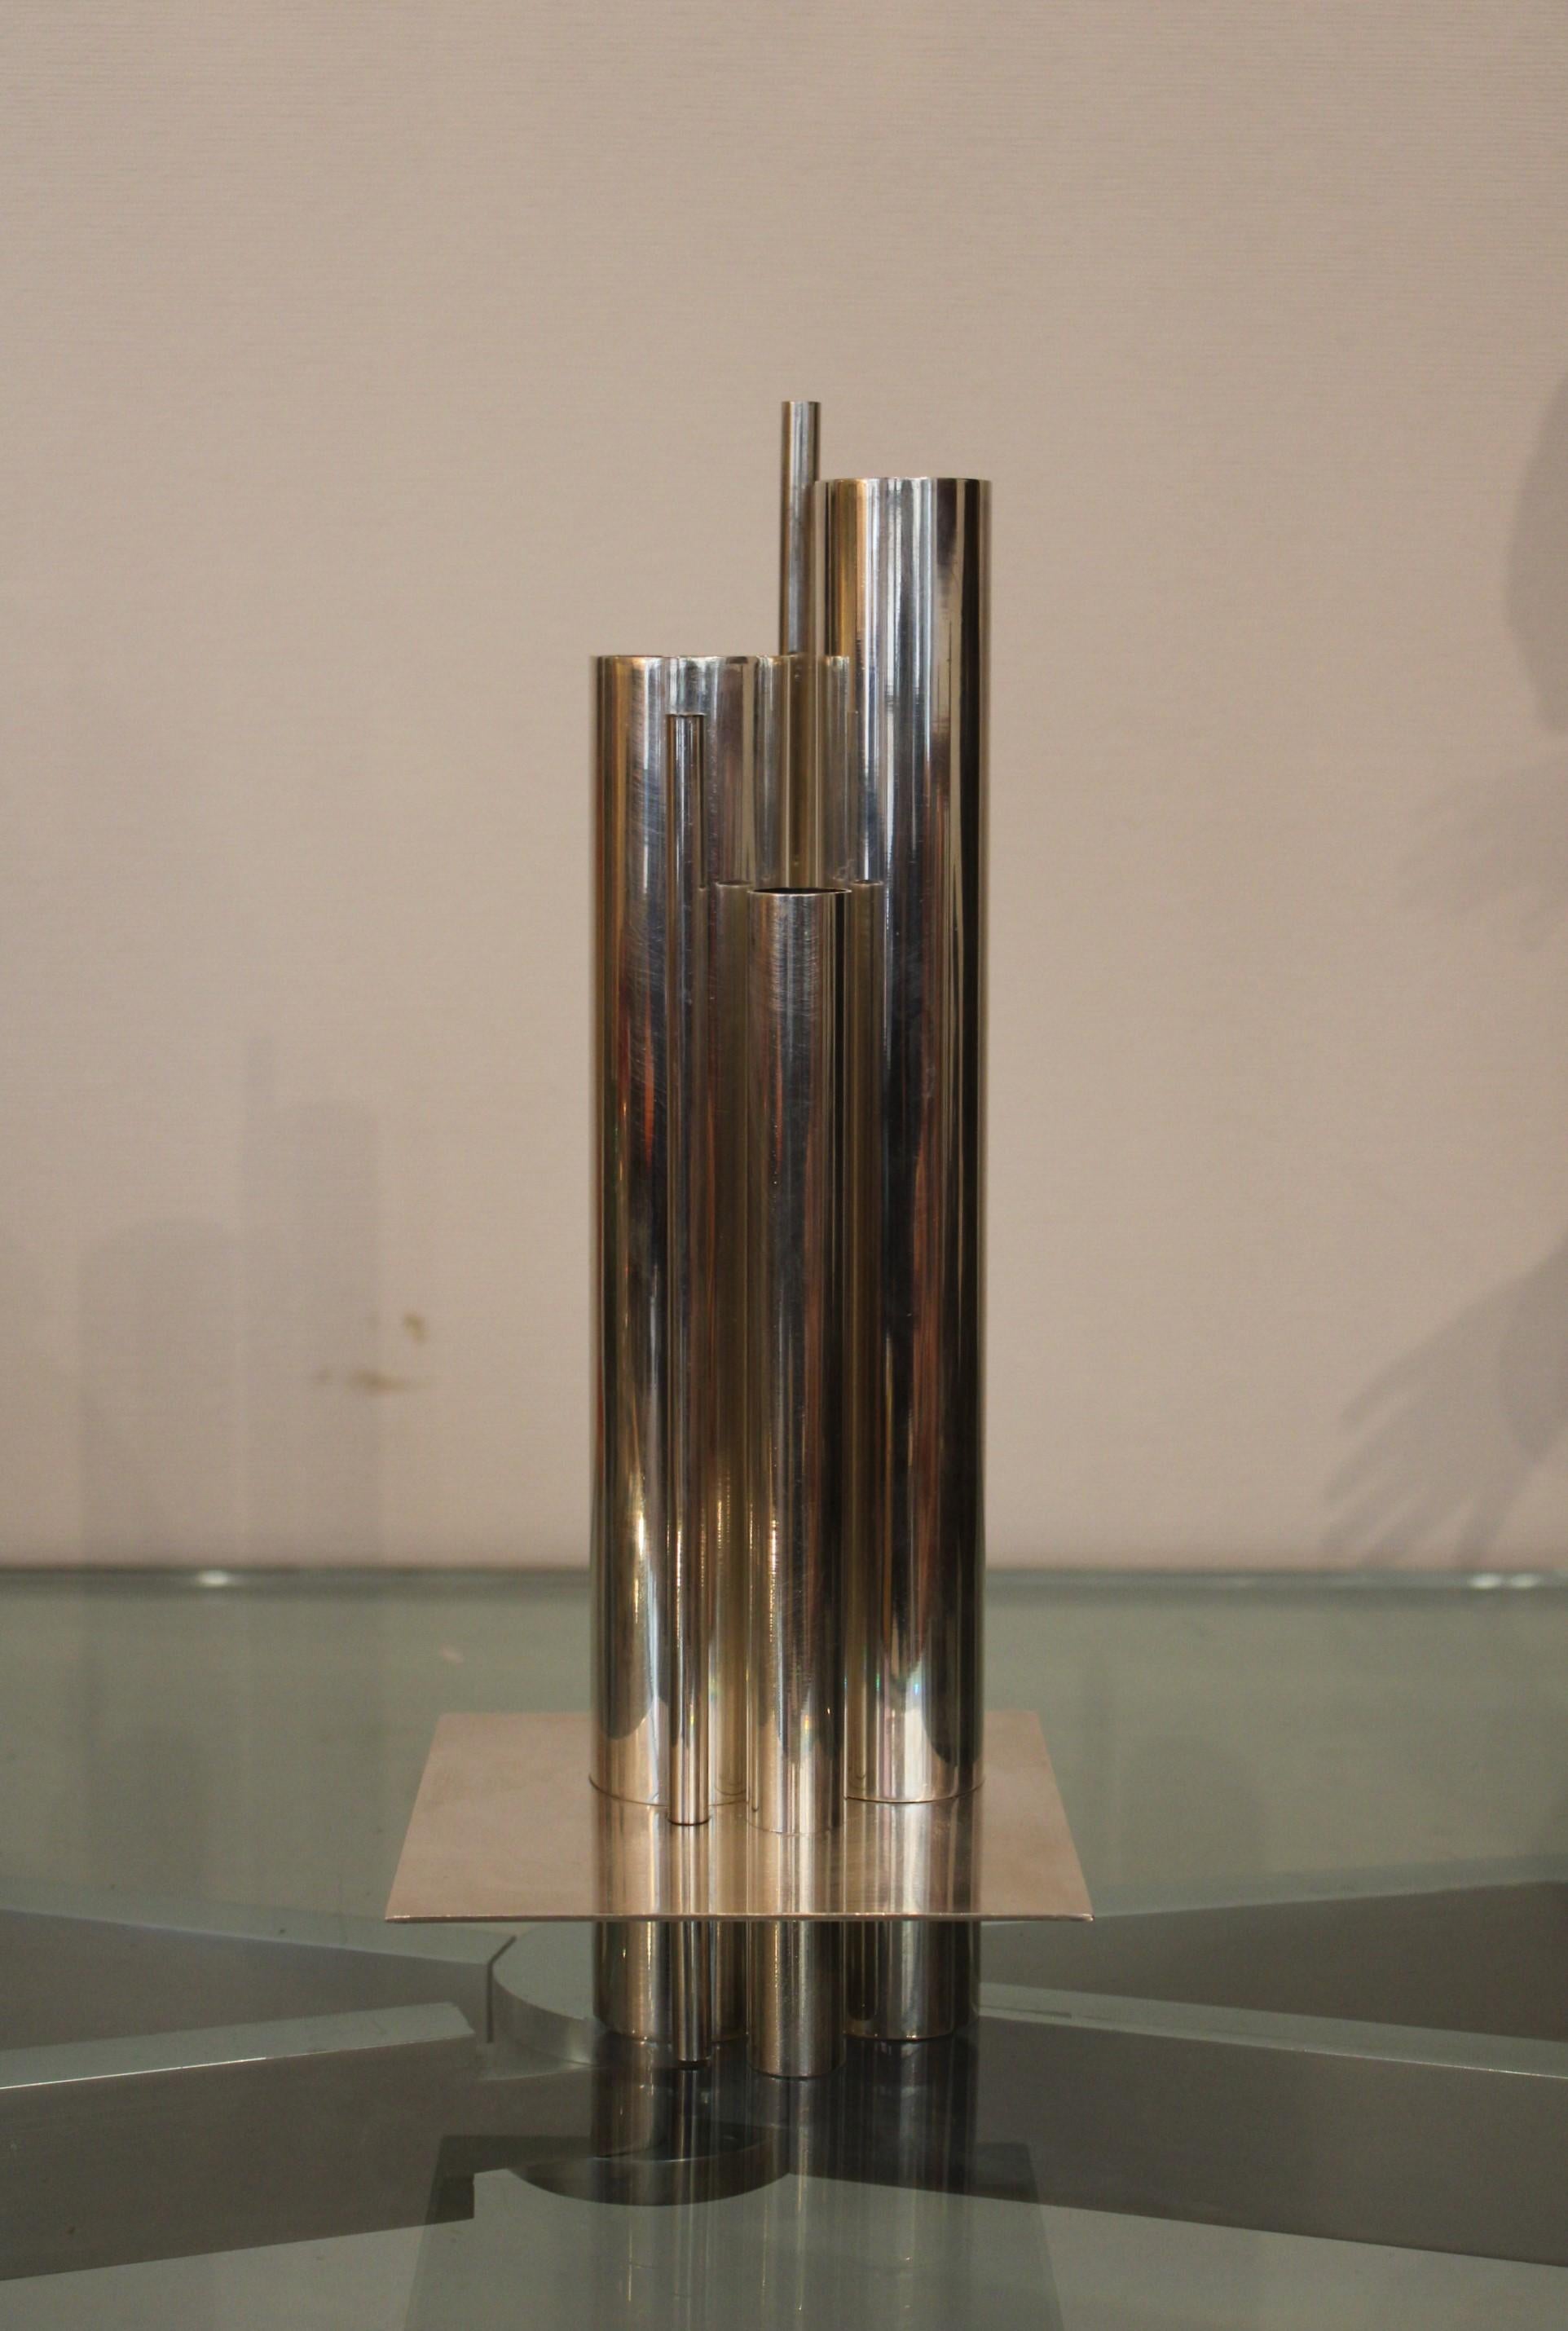 Silver-plated vase
Composed of five tubes and a square plate
Design by Jacques Sitoleux for Christofle France 
Marked CHRISTOFLE FRANCE COLL GALLIA

One tube is moving.